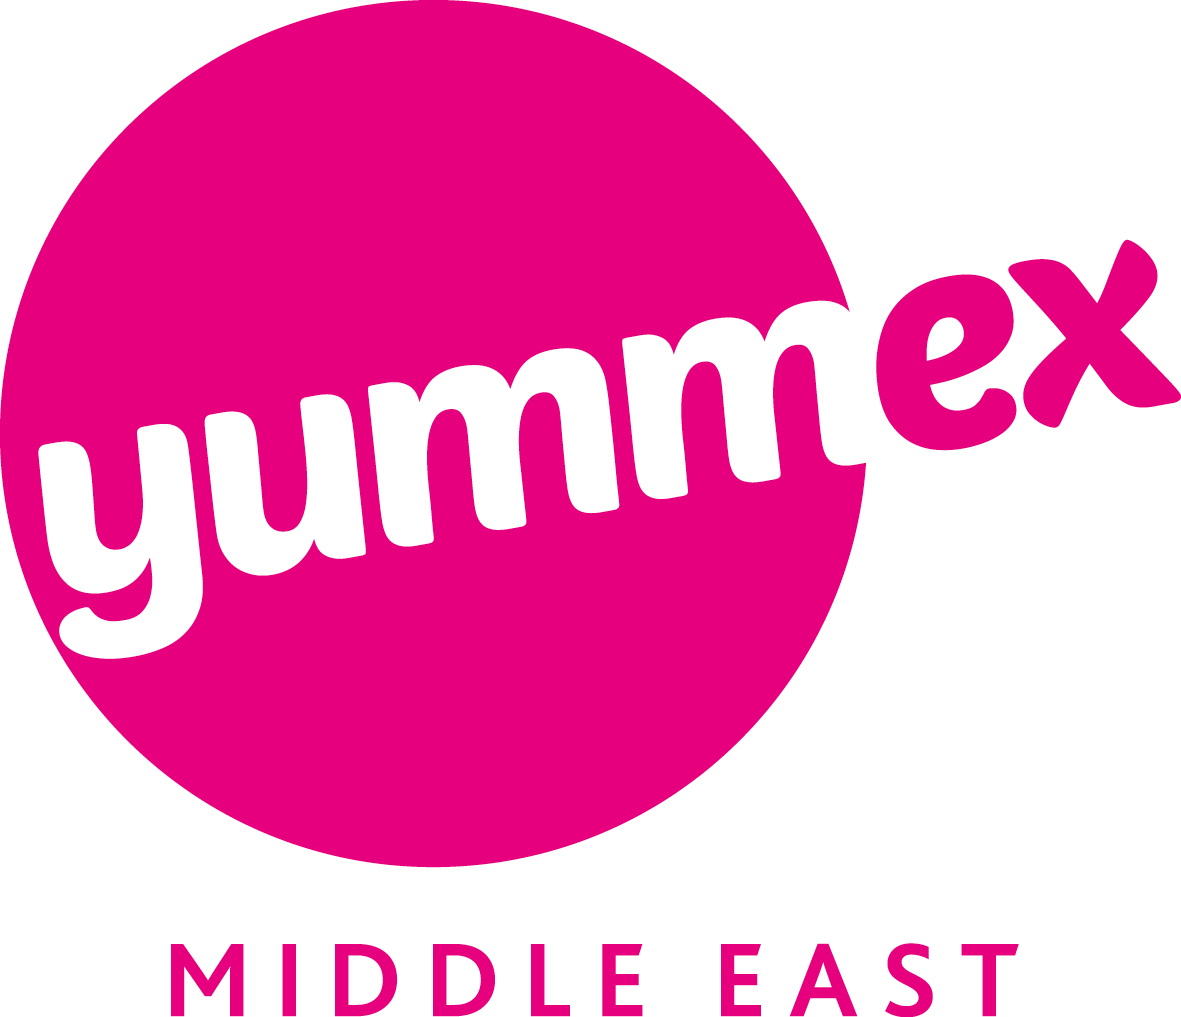 yummex 2018: optimal sales chances for the sweets and snacks industry in the MENA region